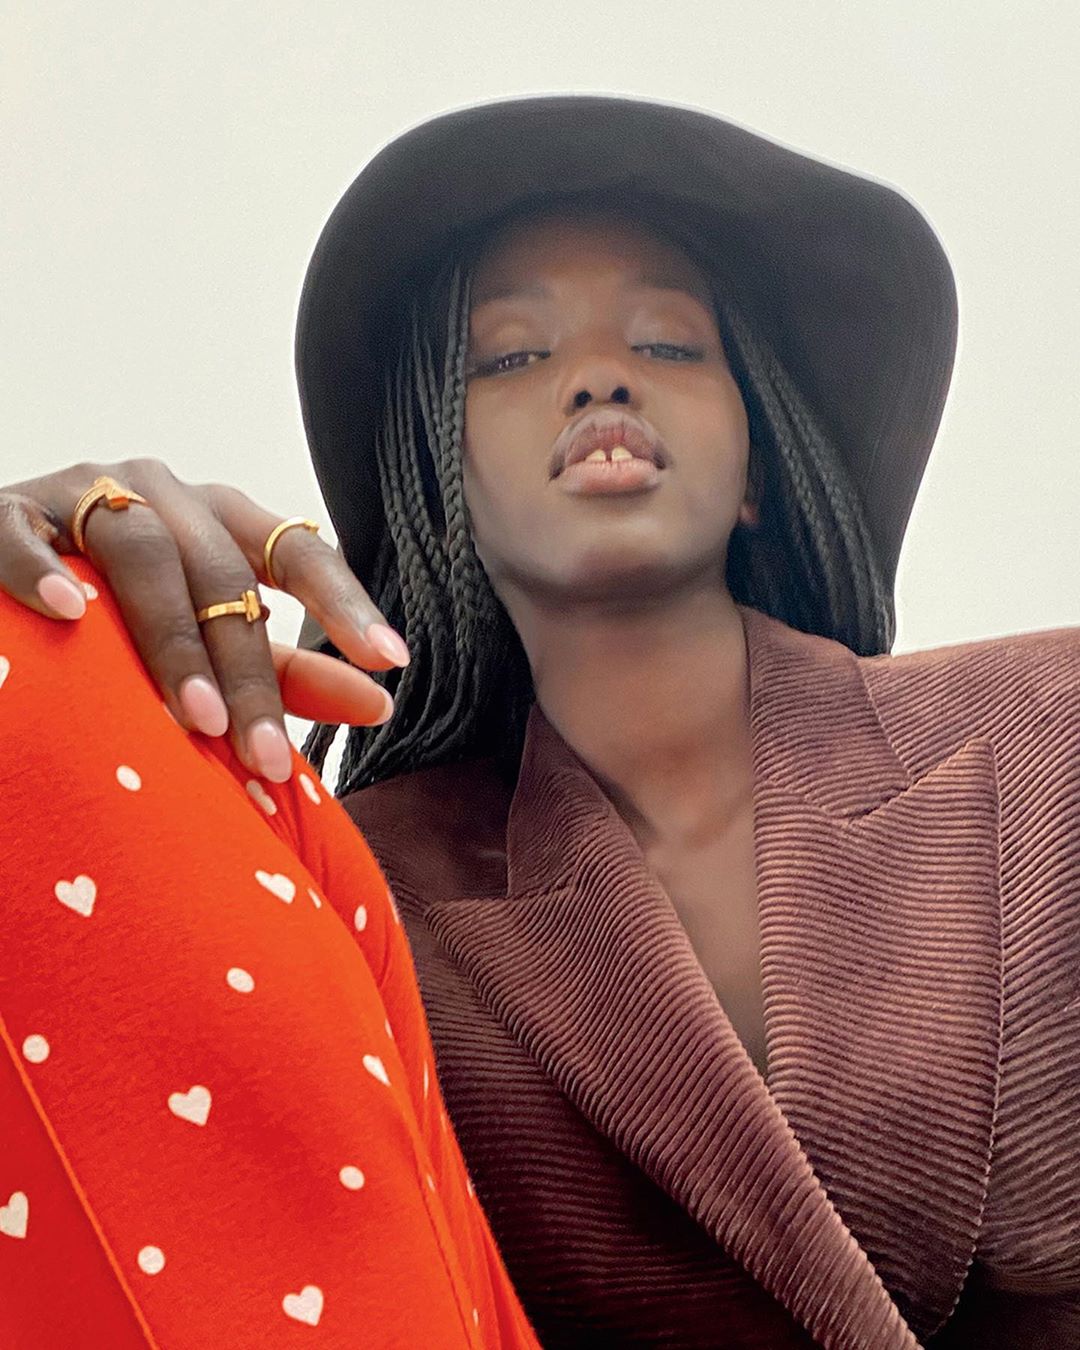 Tiffany & Co. - Tiffany in the Press
———
In the ring. Model @adutakech wears new #TiffanyT1 designs in the October issue of @vogueaustralia. Discover more via the link in bio. #TiffanyT #TiffanyAndCo...